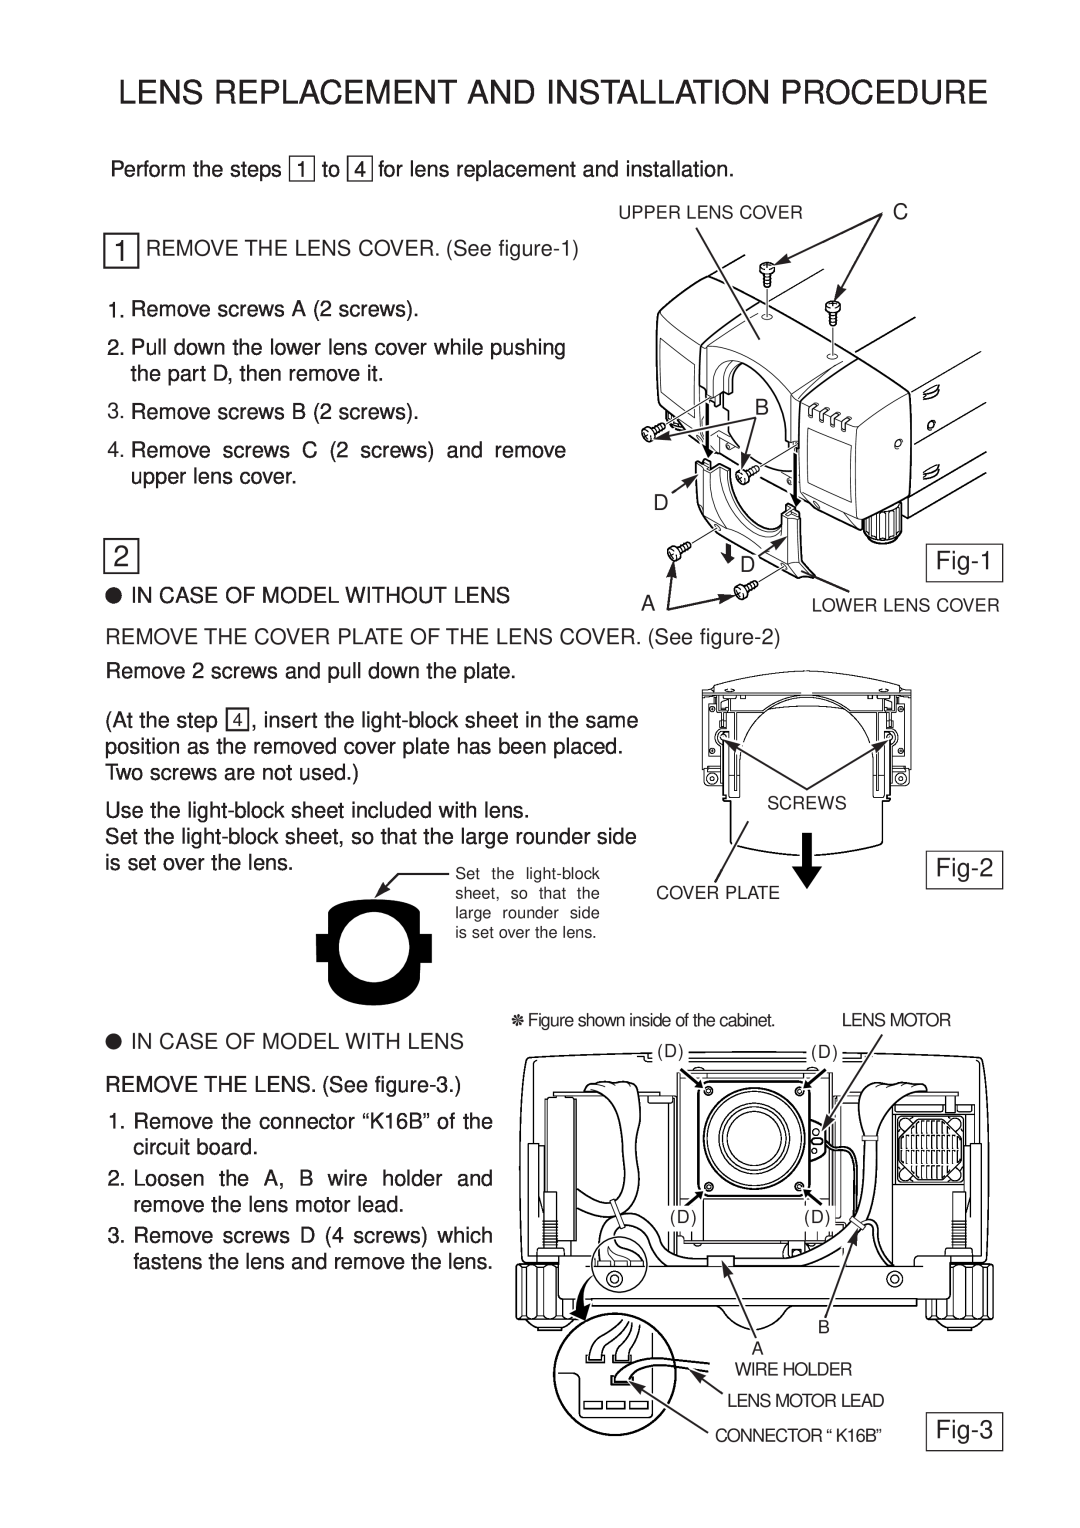 Sanyo LNS-M01 manual Lens Replacement And Installation Procedure, Fig-1, Fig-2, Fig-3 